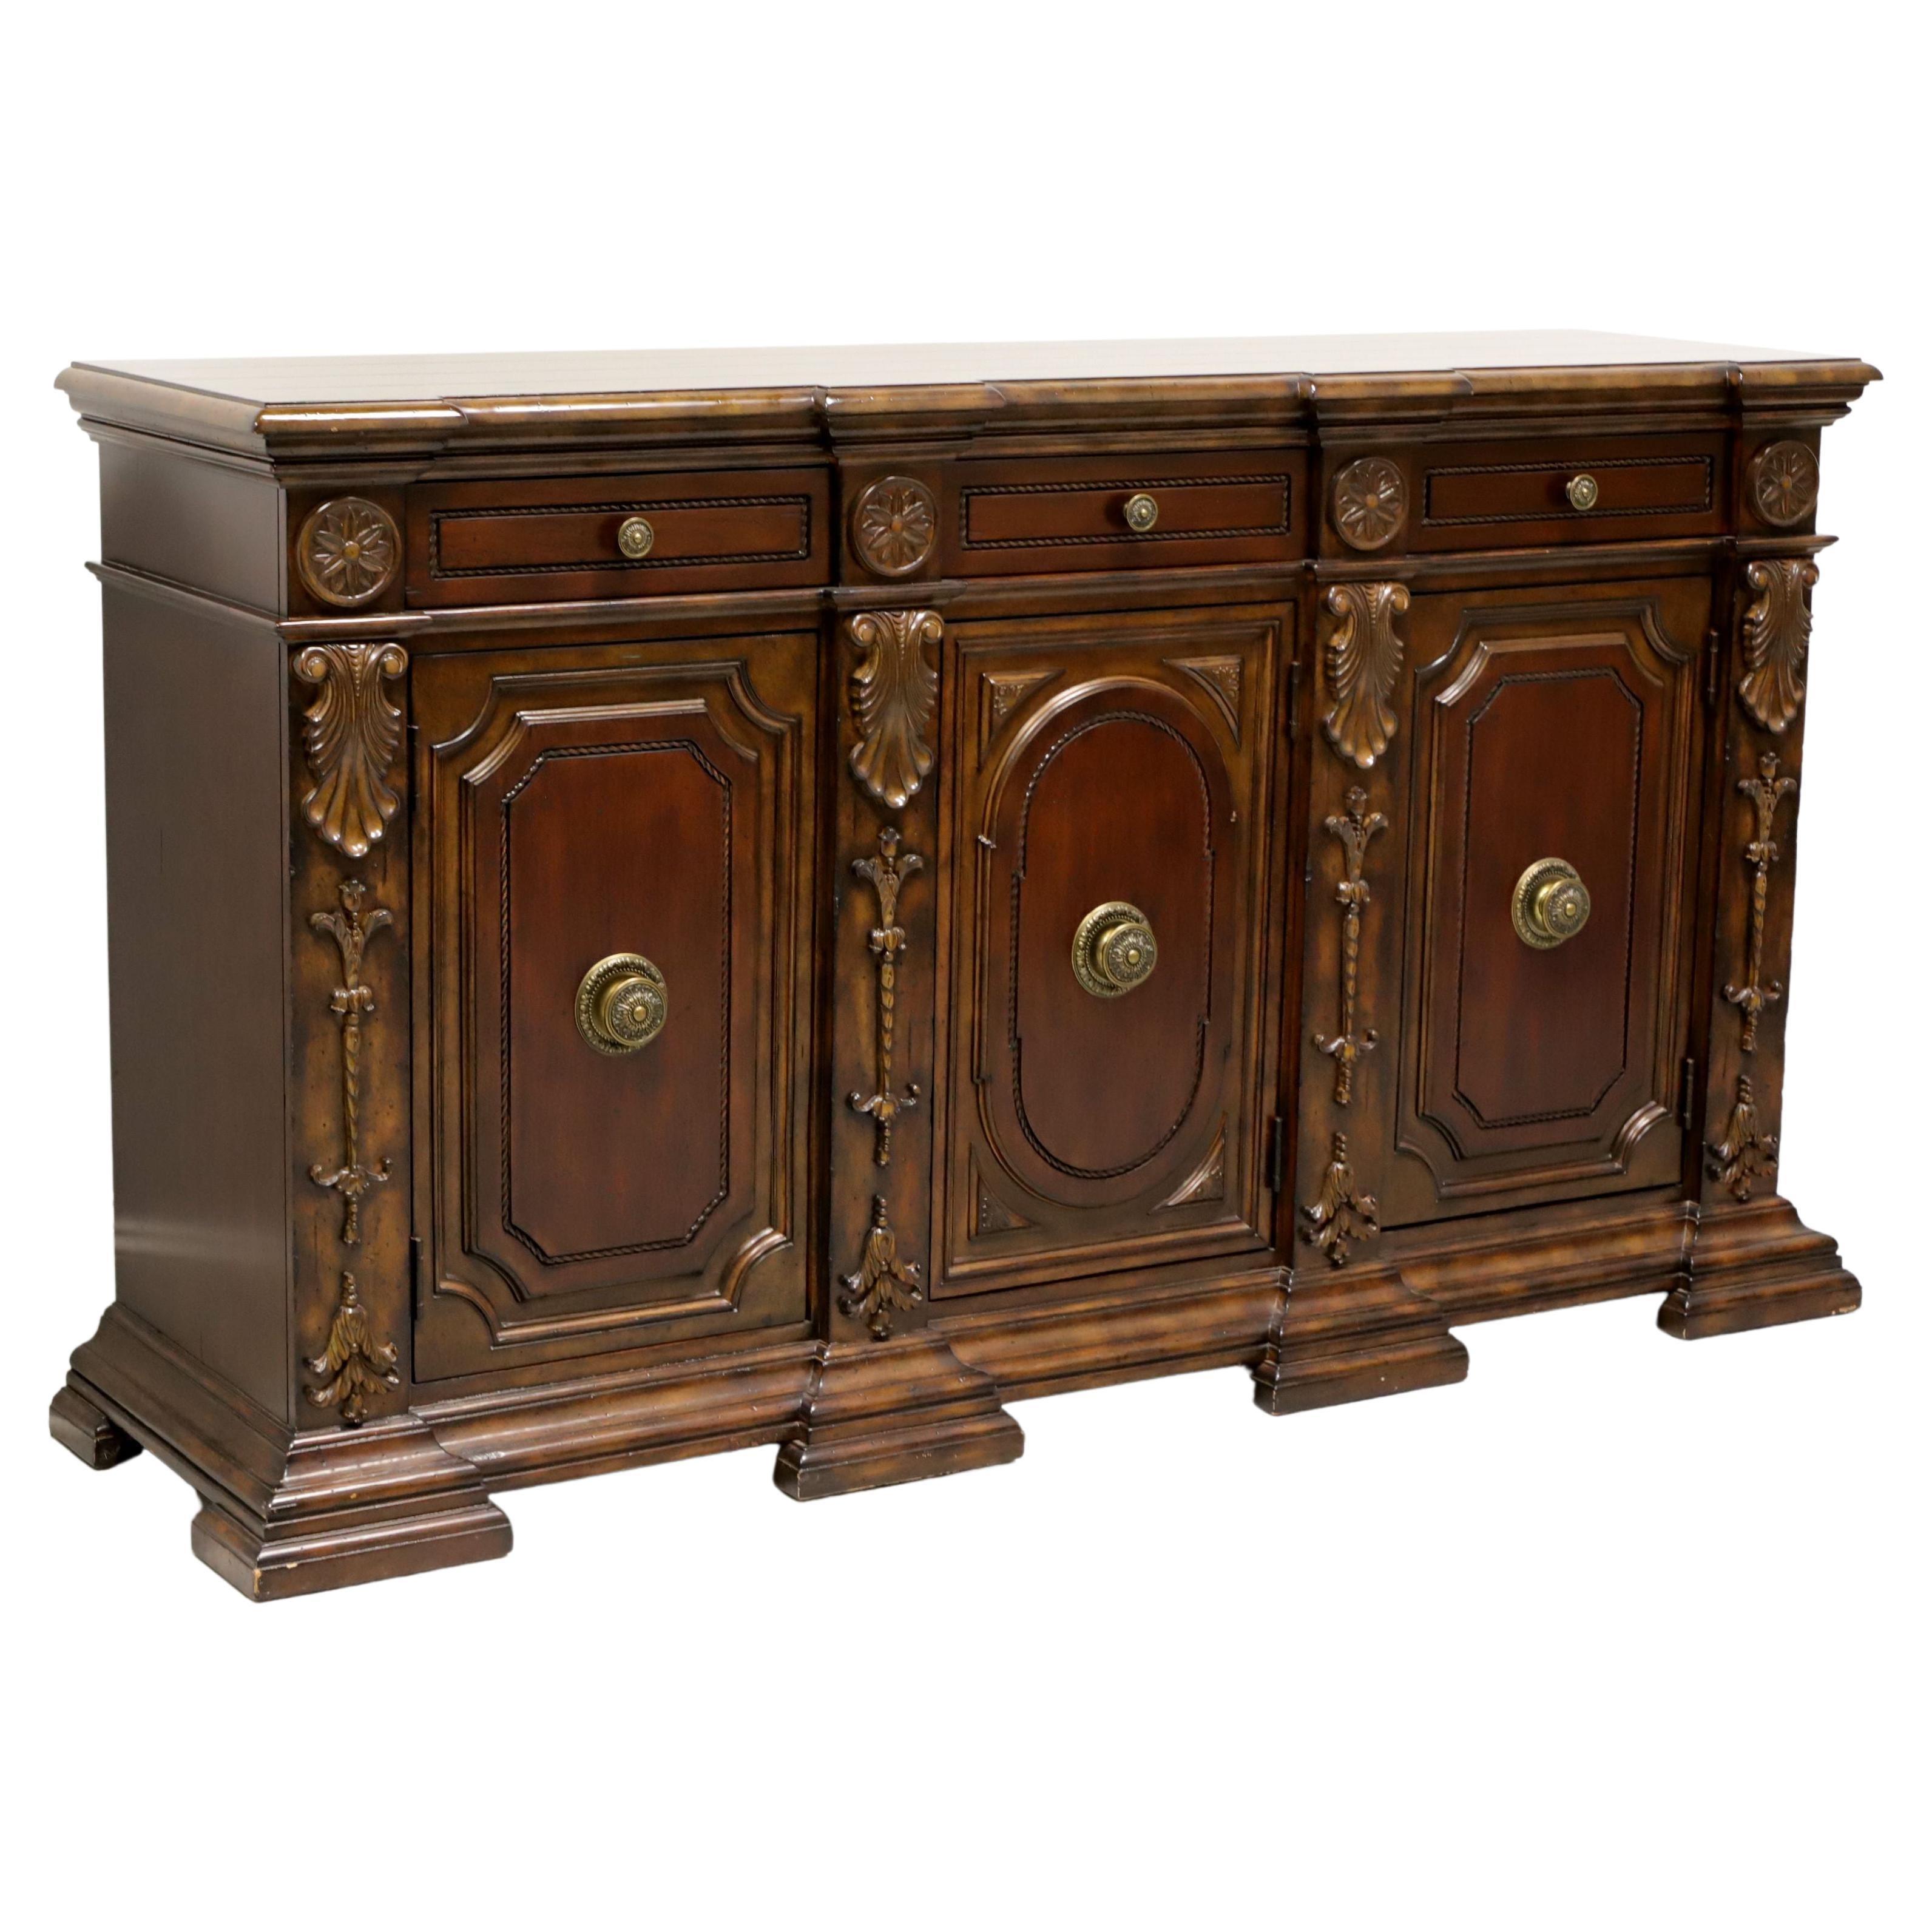 Monumental Transitional Style Carved Mahogany Buffet Credenza For Sale